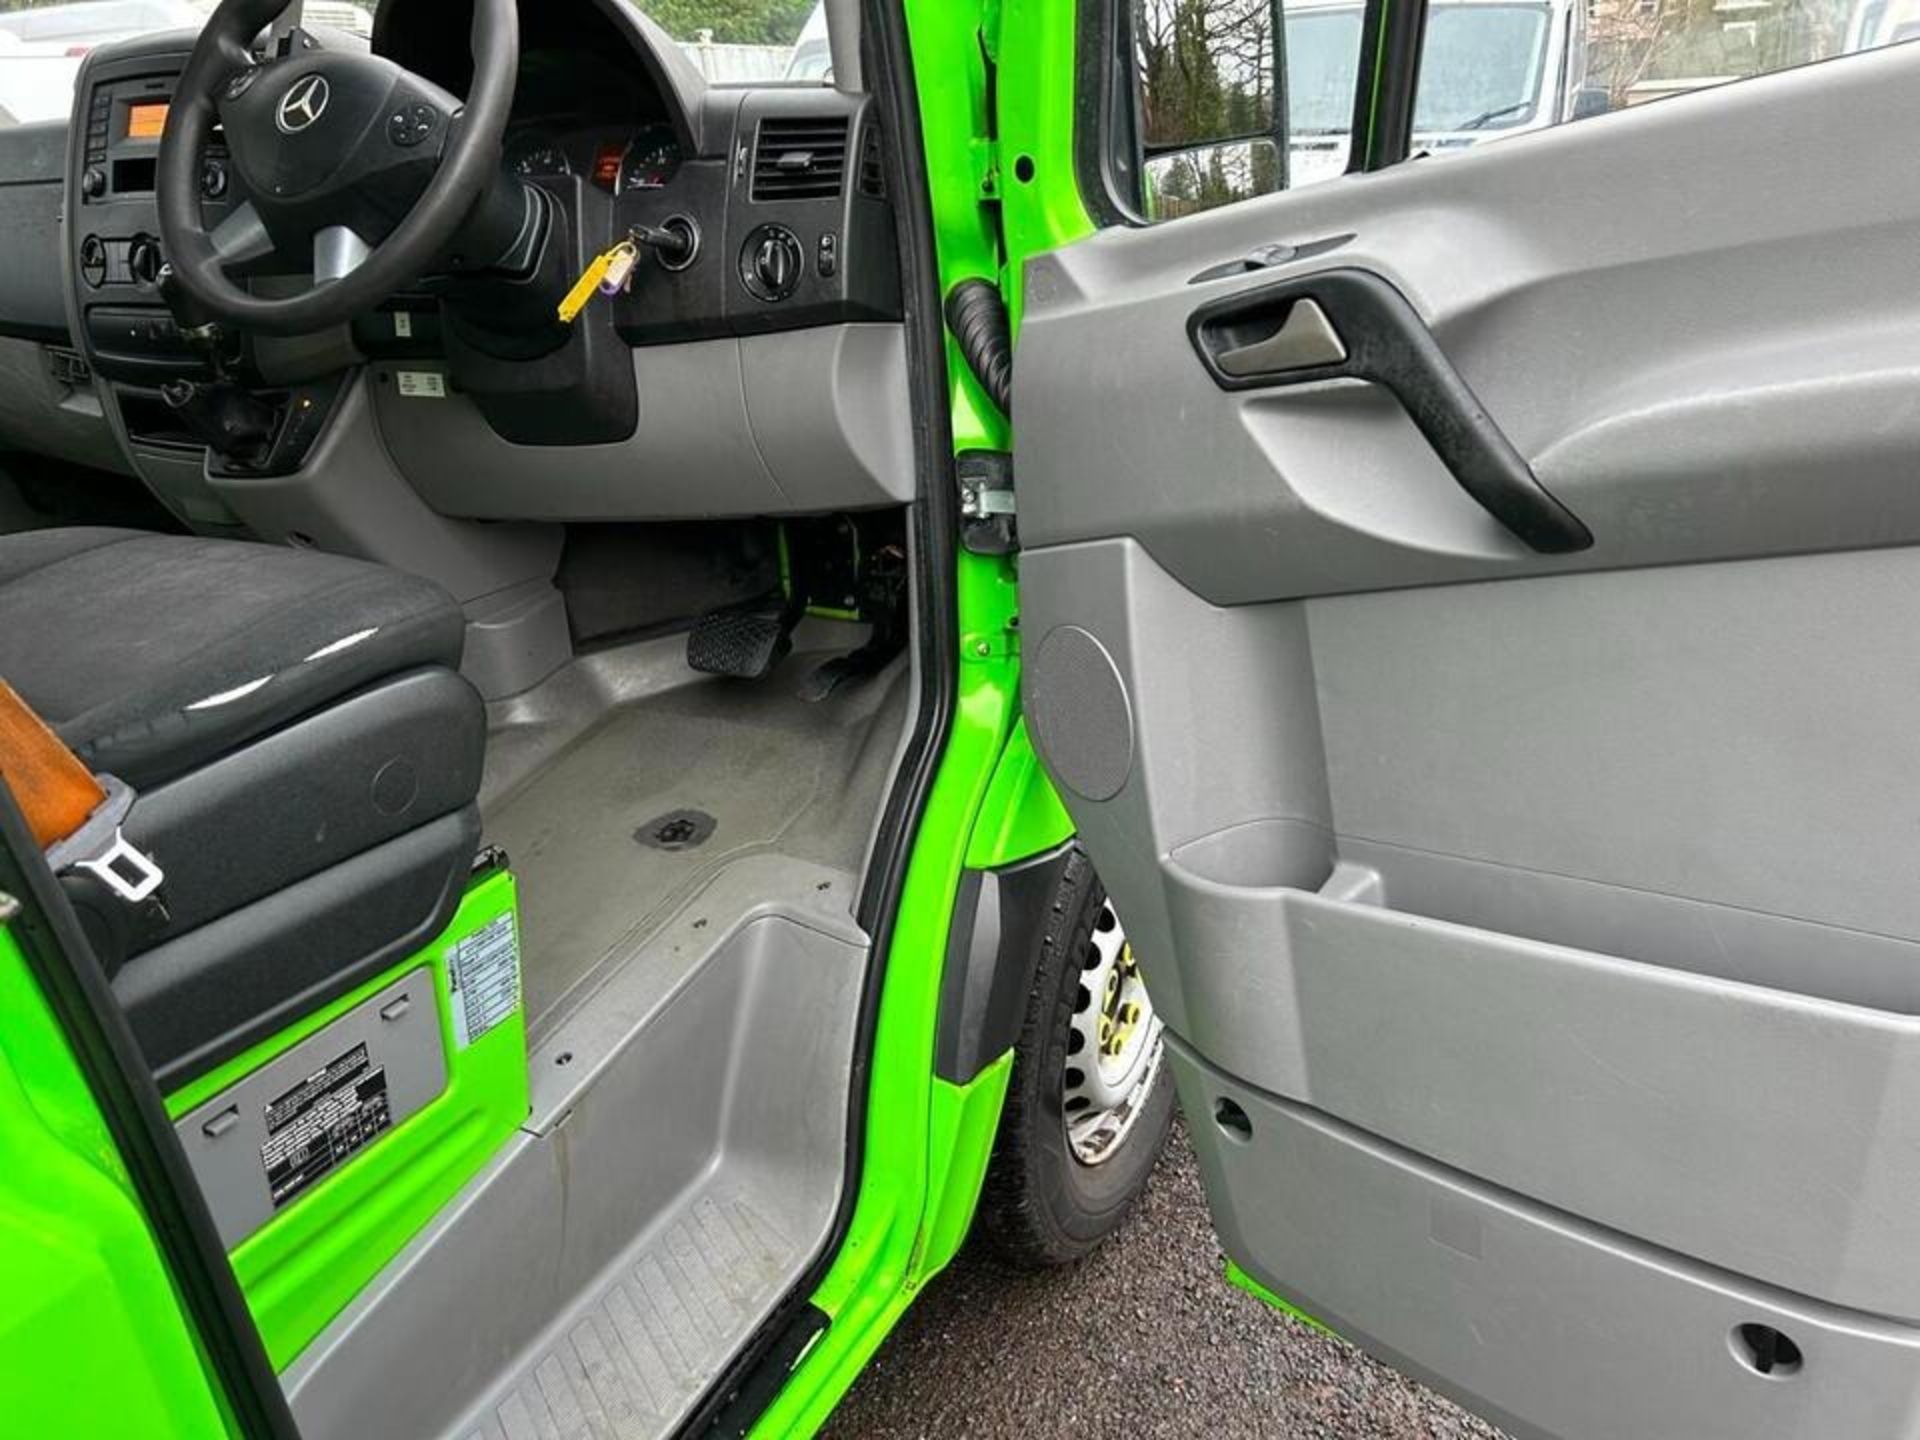 >>>SPECIAL CLEARANCE<<< 2018 MERCEDES-BENZ SPRINTER 314 CDI FRIDGE FREEZER CHASSIS CAB - Image 10 of 15